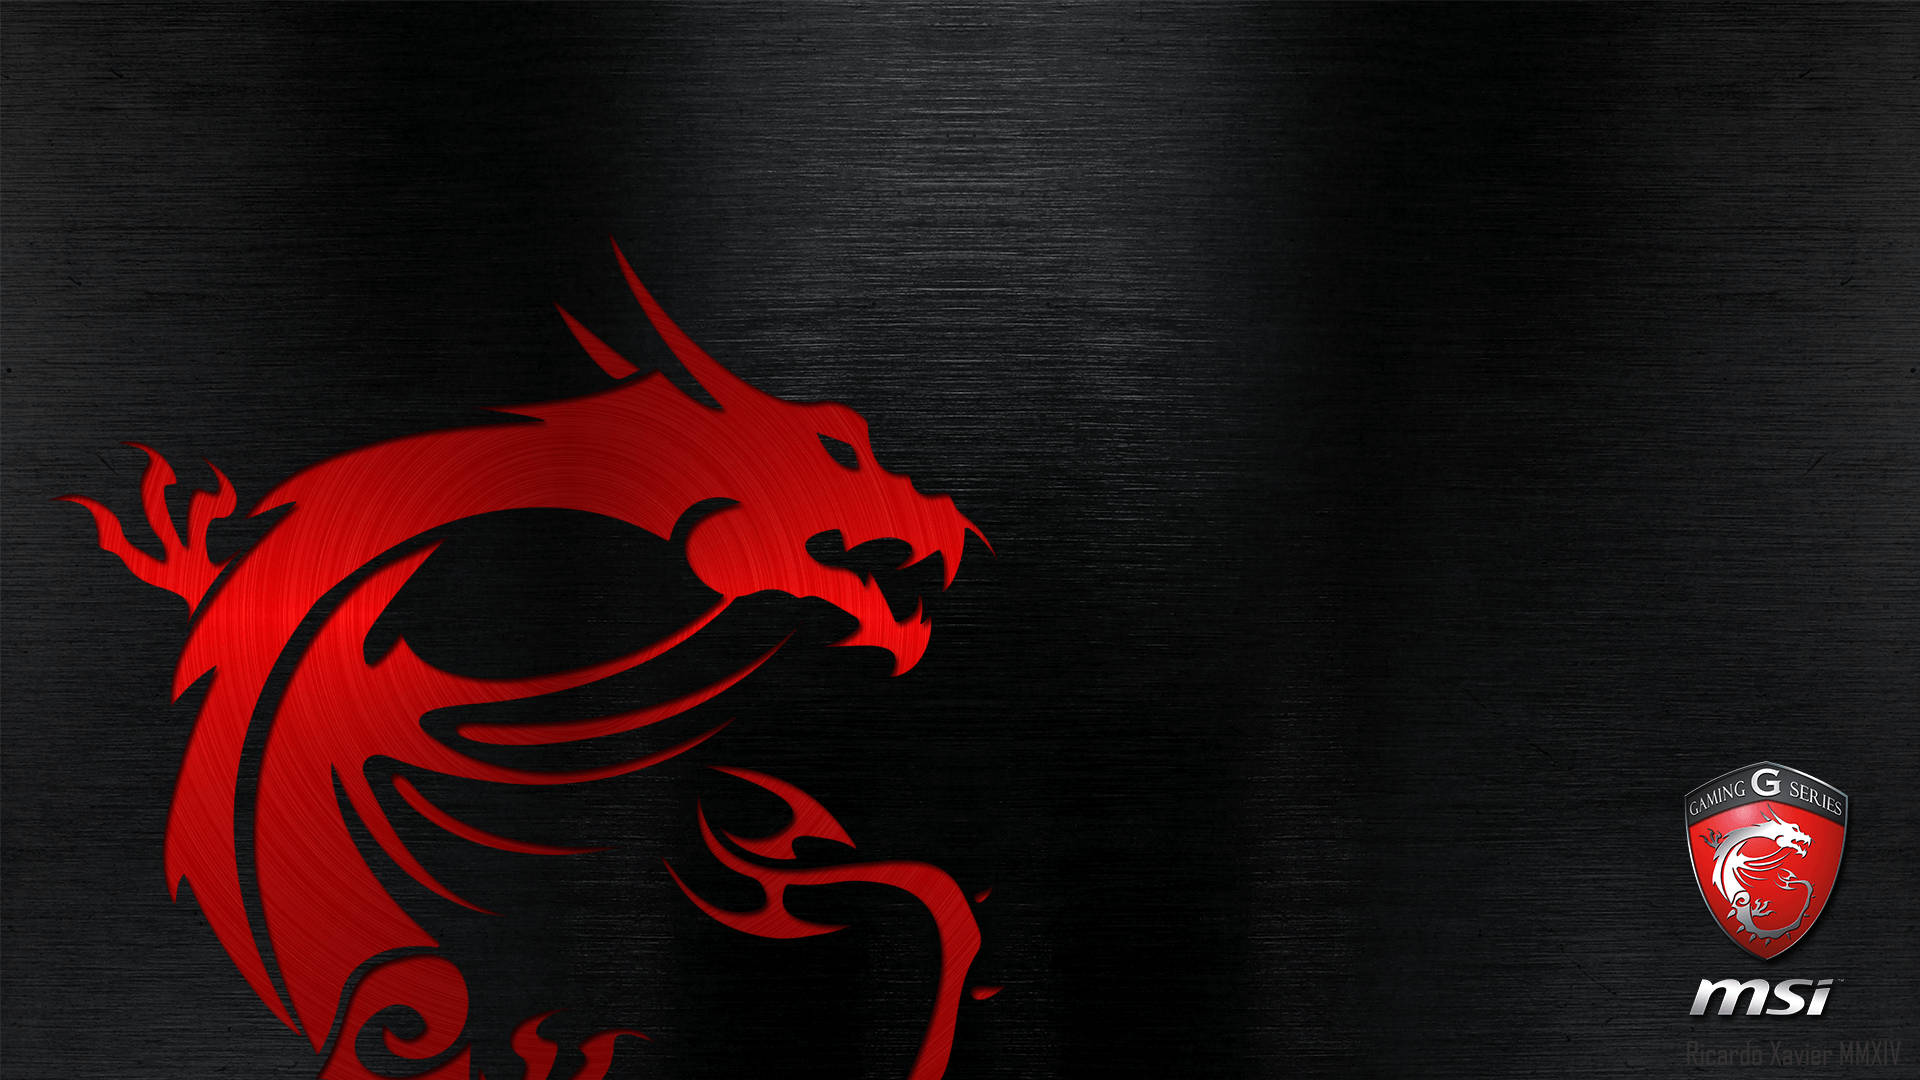 MSI G Series Logo Emblazoned on a Red Background Wallpaper